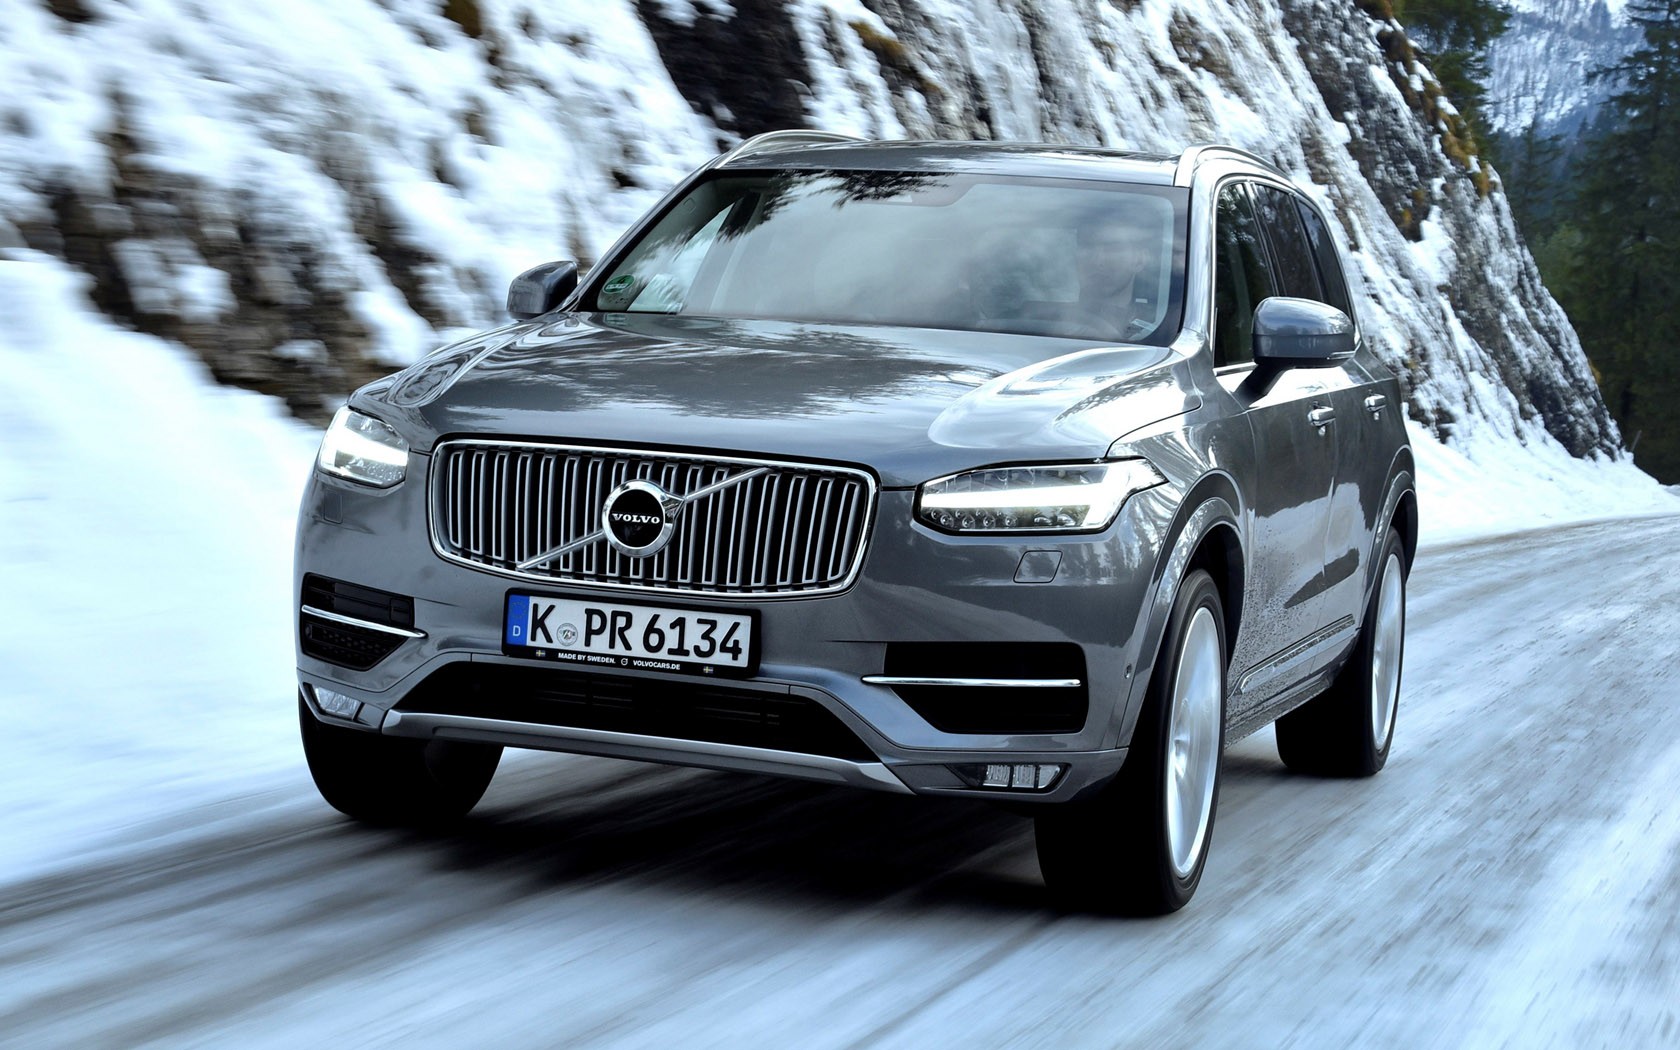 Volvo Cars “ultimate driving simulator” uses latest gaming technology to  develop safer cars - Volvo Car USA Newsroom